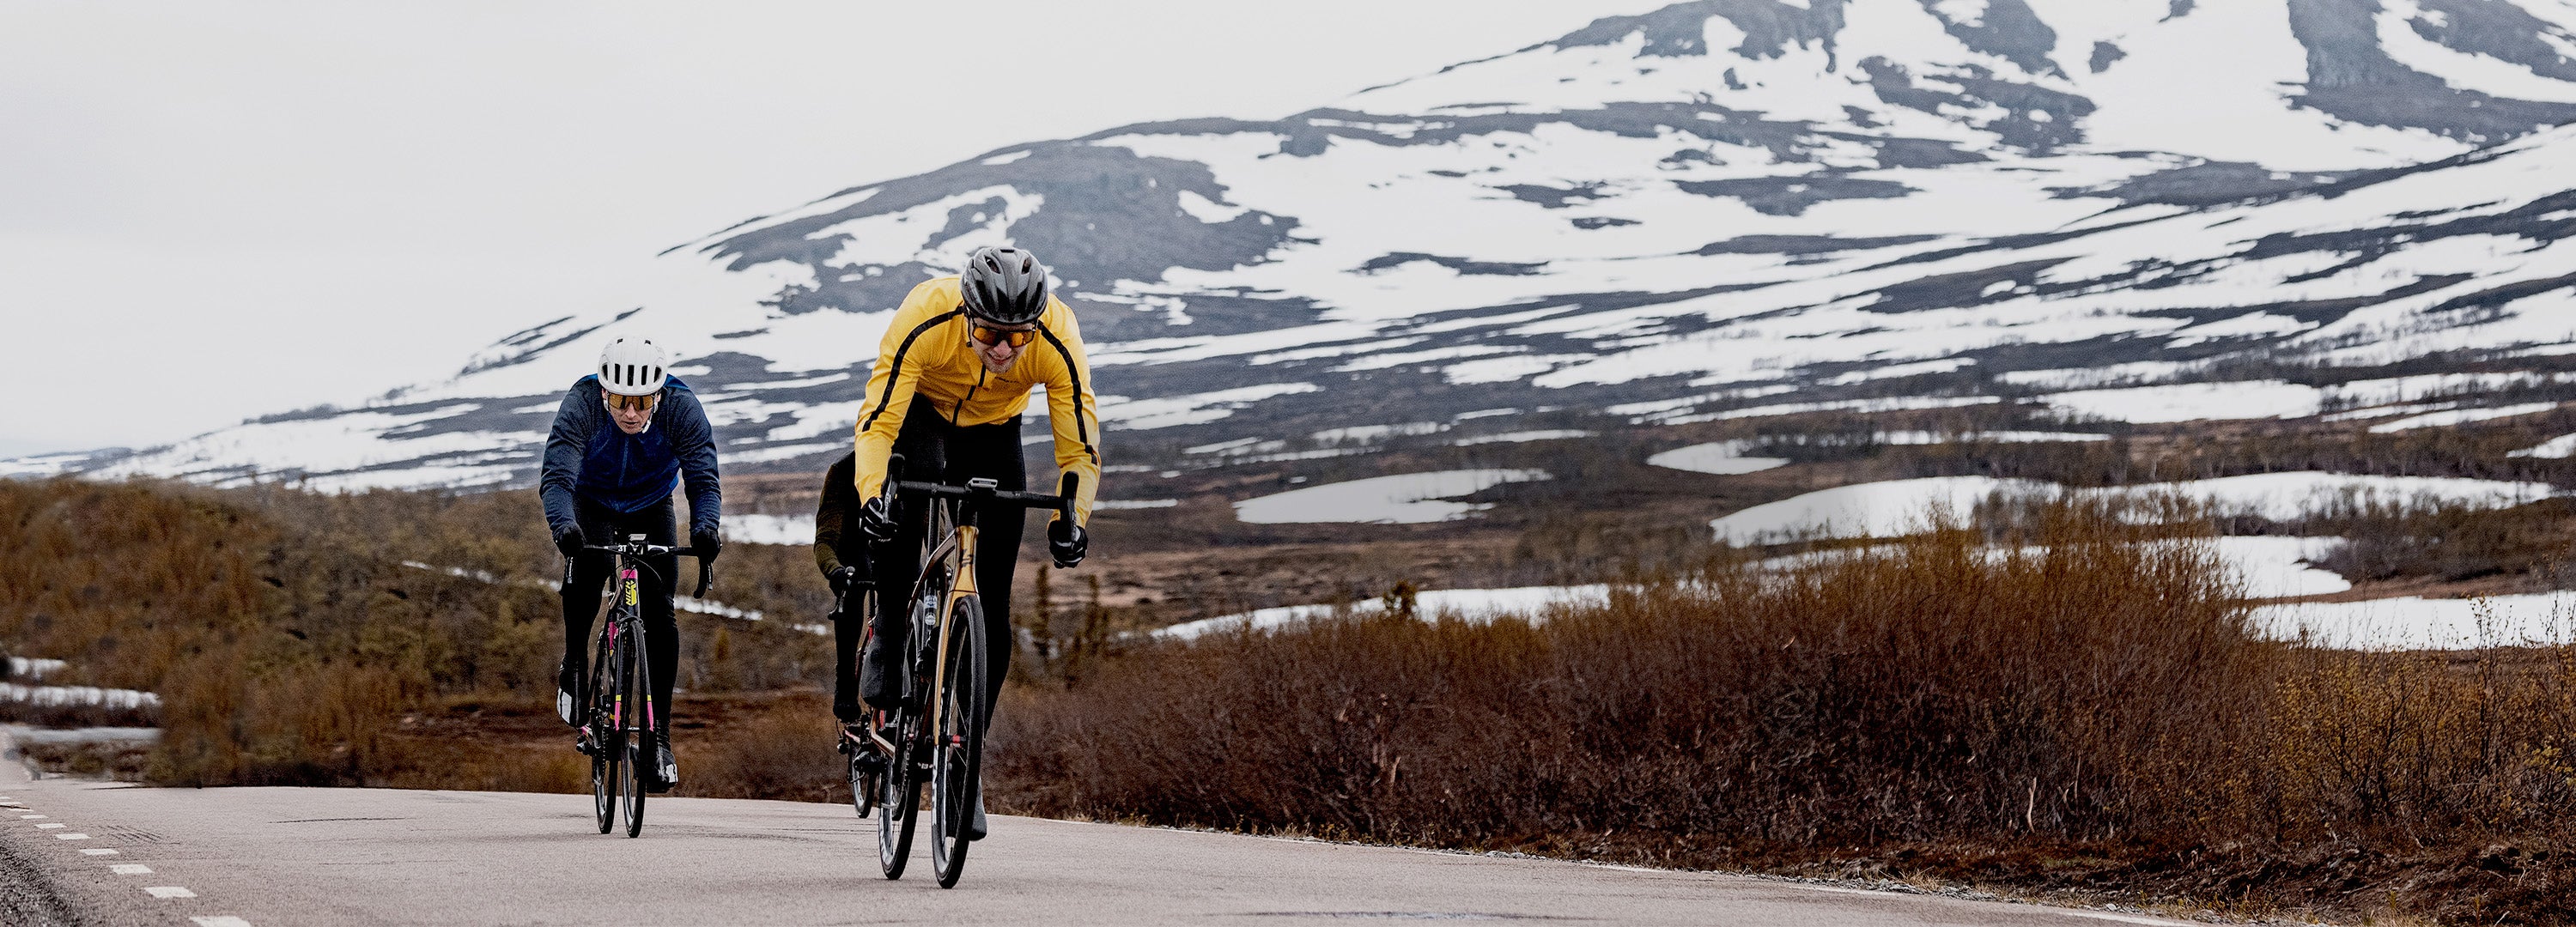 Winter Cycling Clothing Sale, Up to 65% OFF